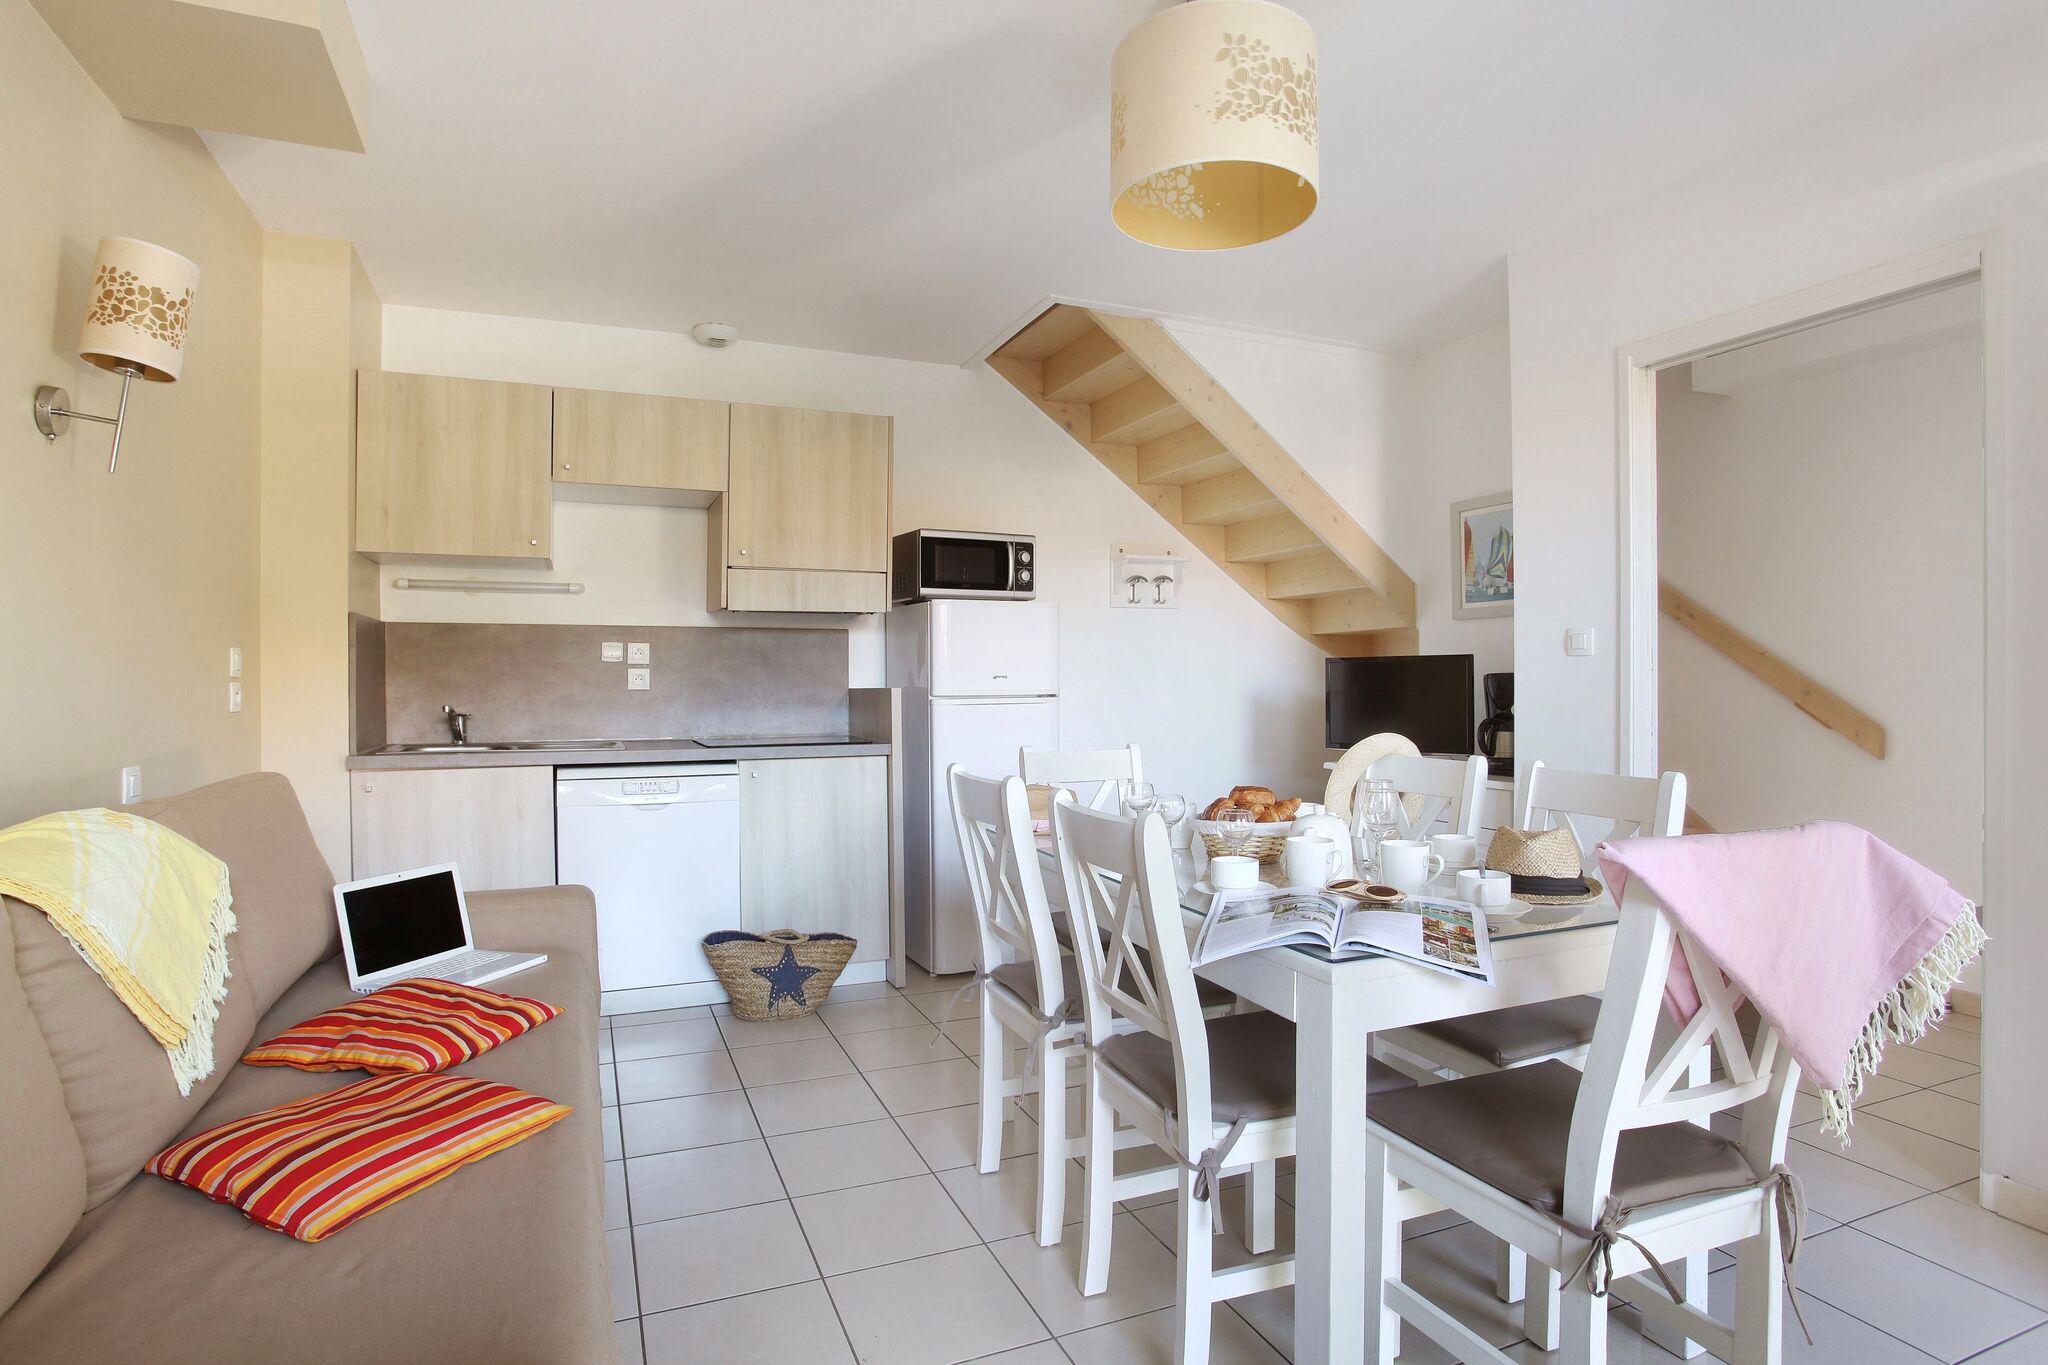 Bright maisonette near a medieval town with a city wall